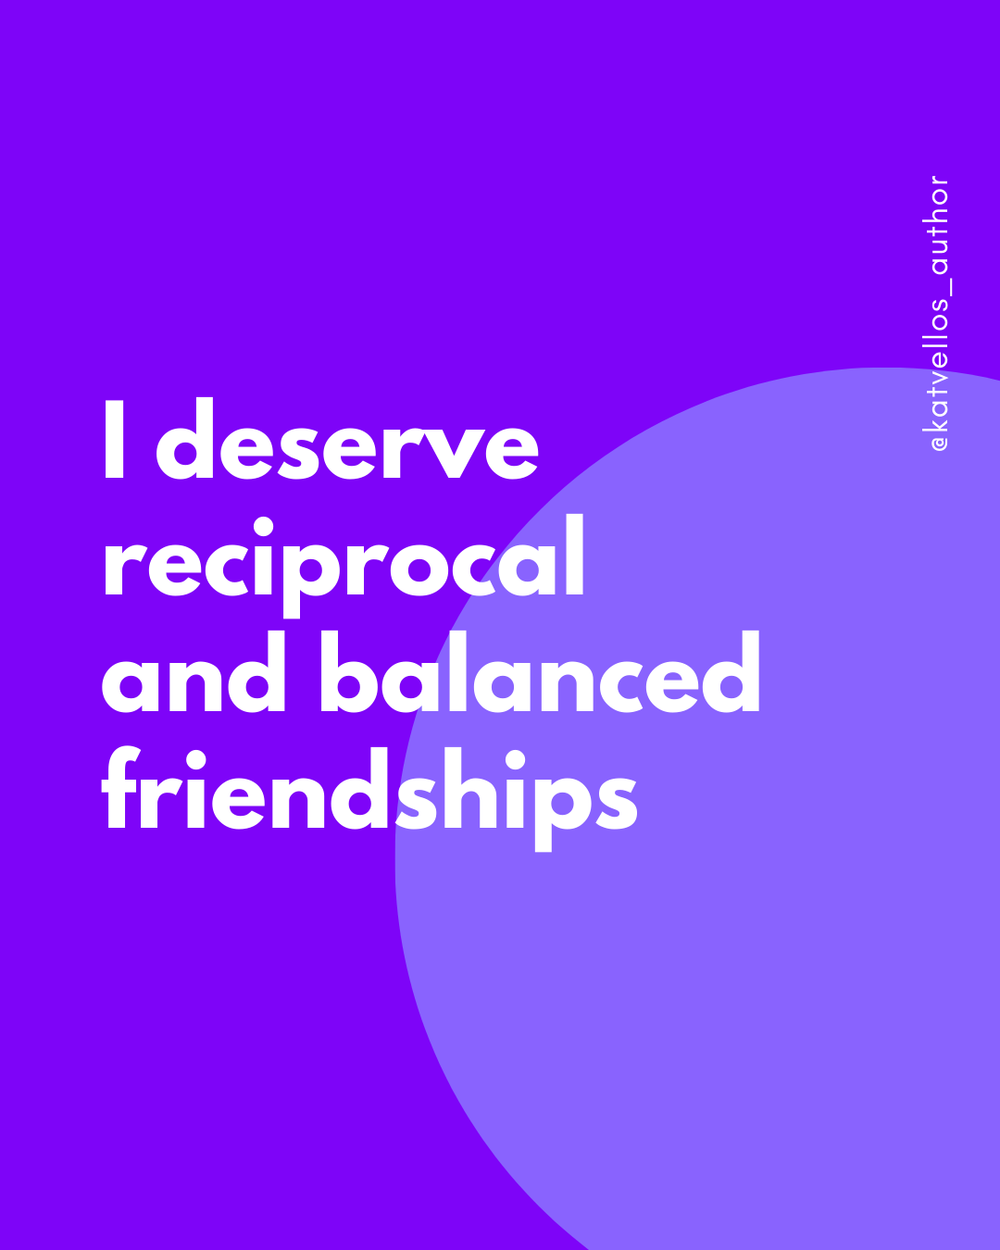 Friendship Affirmations by Kat Vellos at weshouldgettogether.com3.png